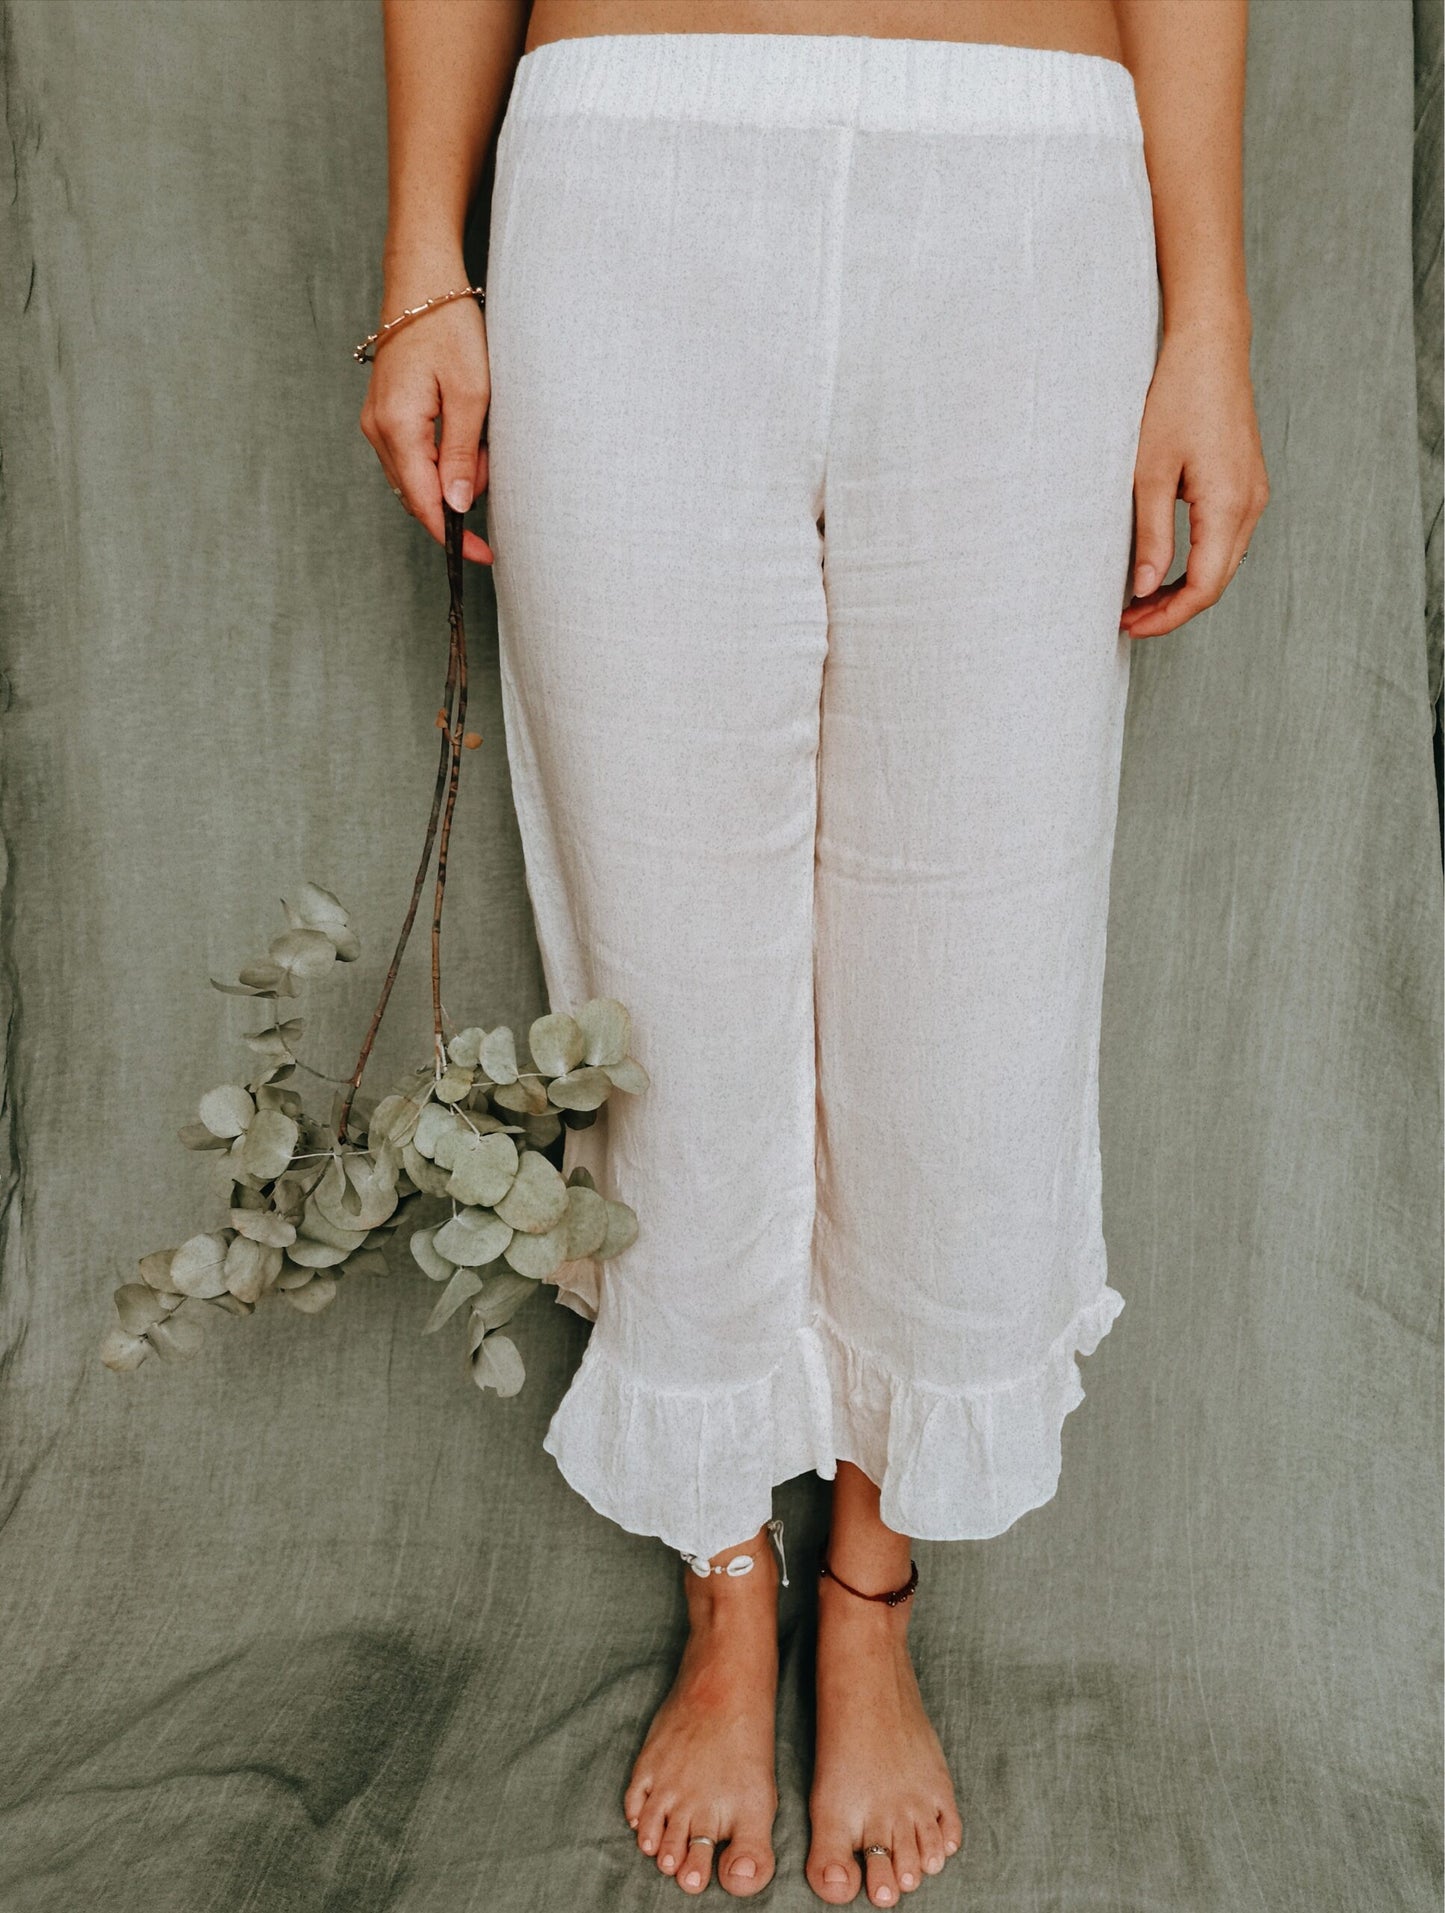 Dressed in comfortable white linen long pants, a woman stands in front of a sage background hold sage coloured foliage. Her pants are handcrafted from the finest linen fabric and are designed and manufactured in South Africa.